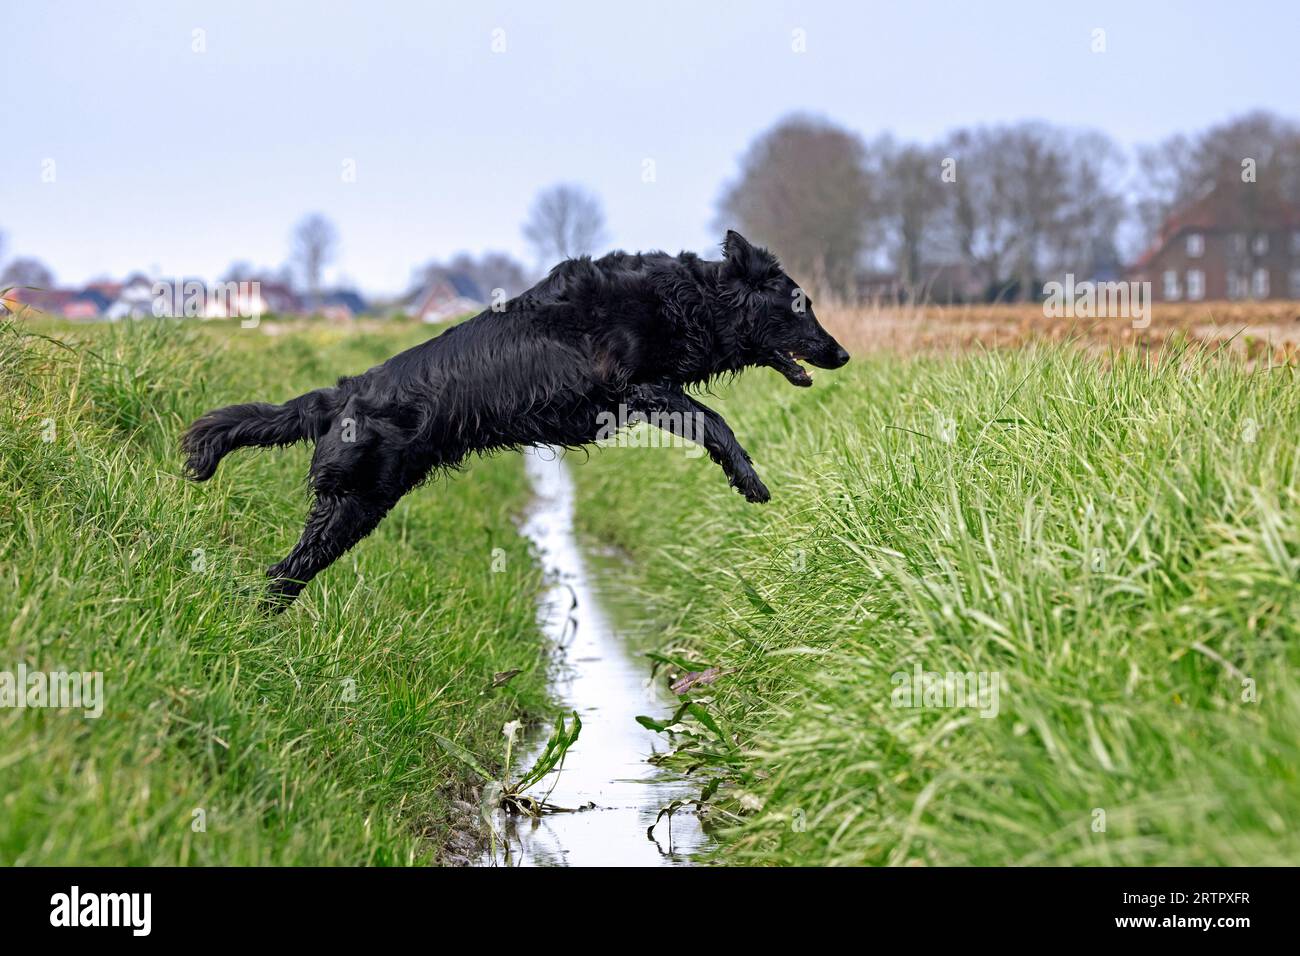 Black flat-coated retriever, gundog / hunting dog breed originating from England, jumping over ditch in field Stock Photo